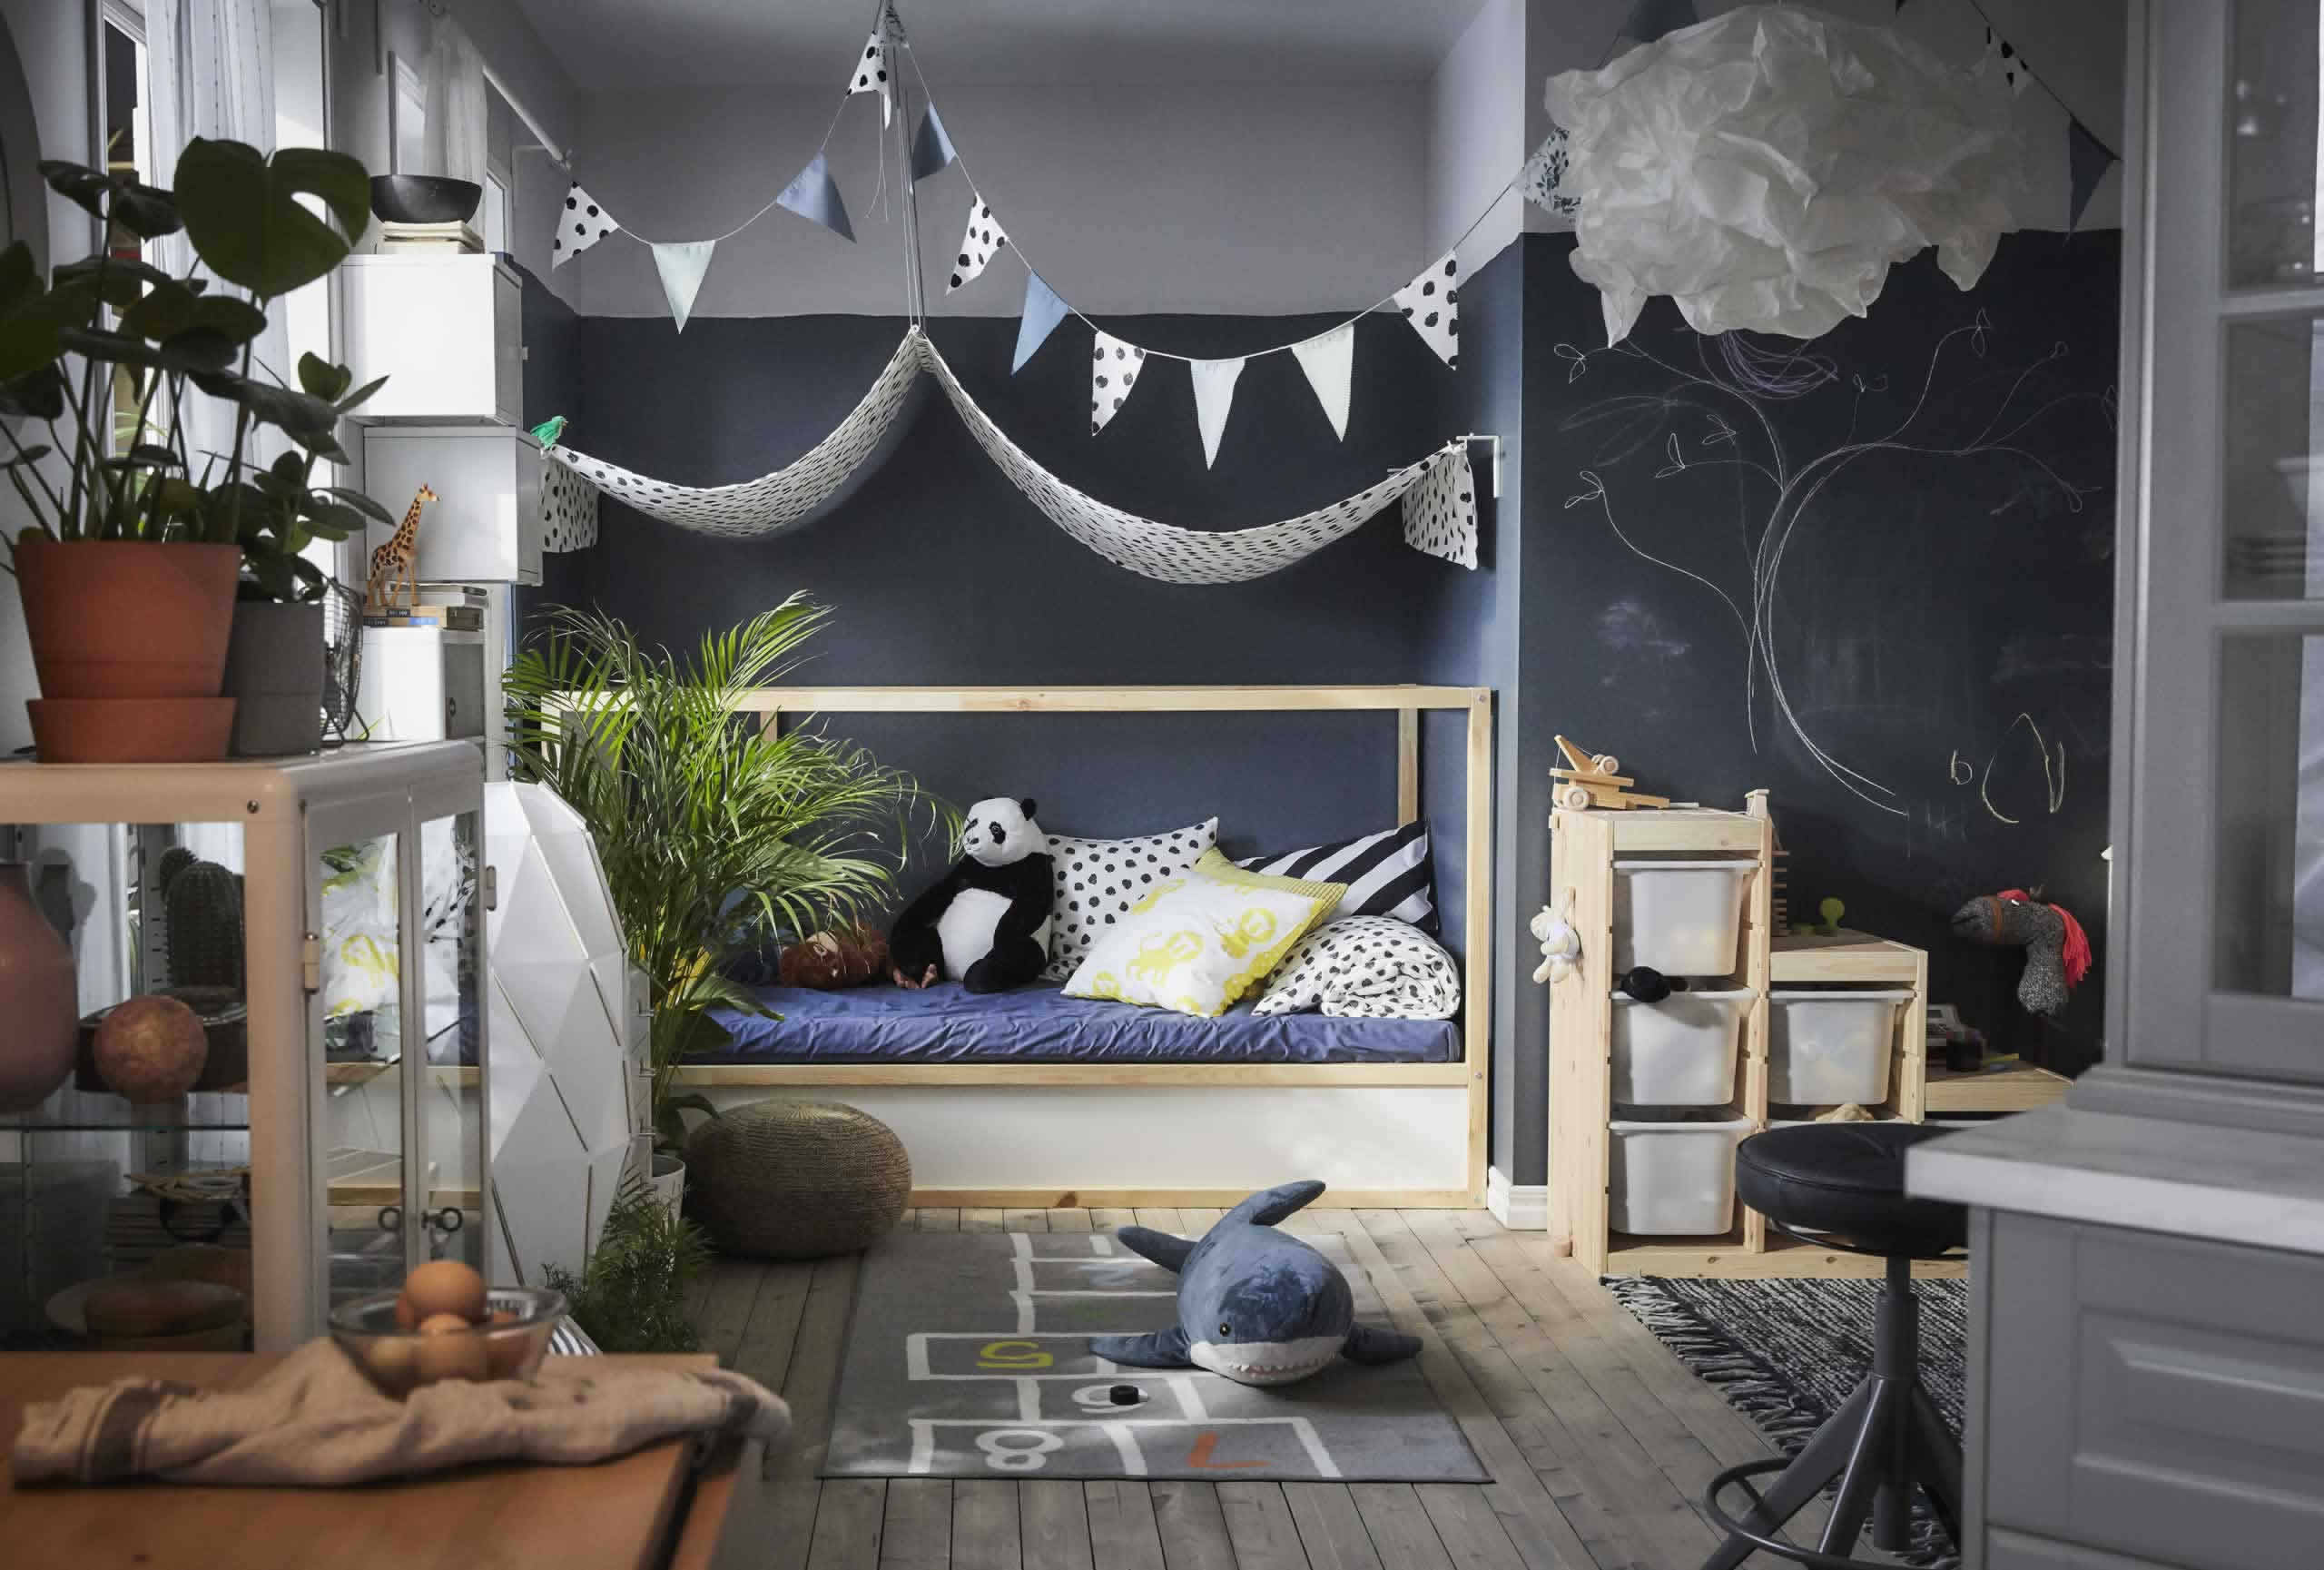 IKEA Ideas - A small-space home for big dude and little dude